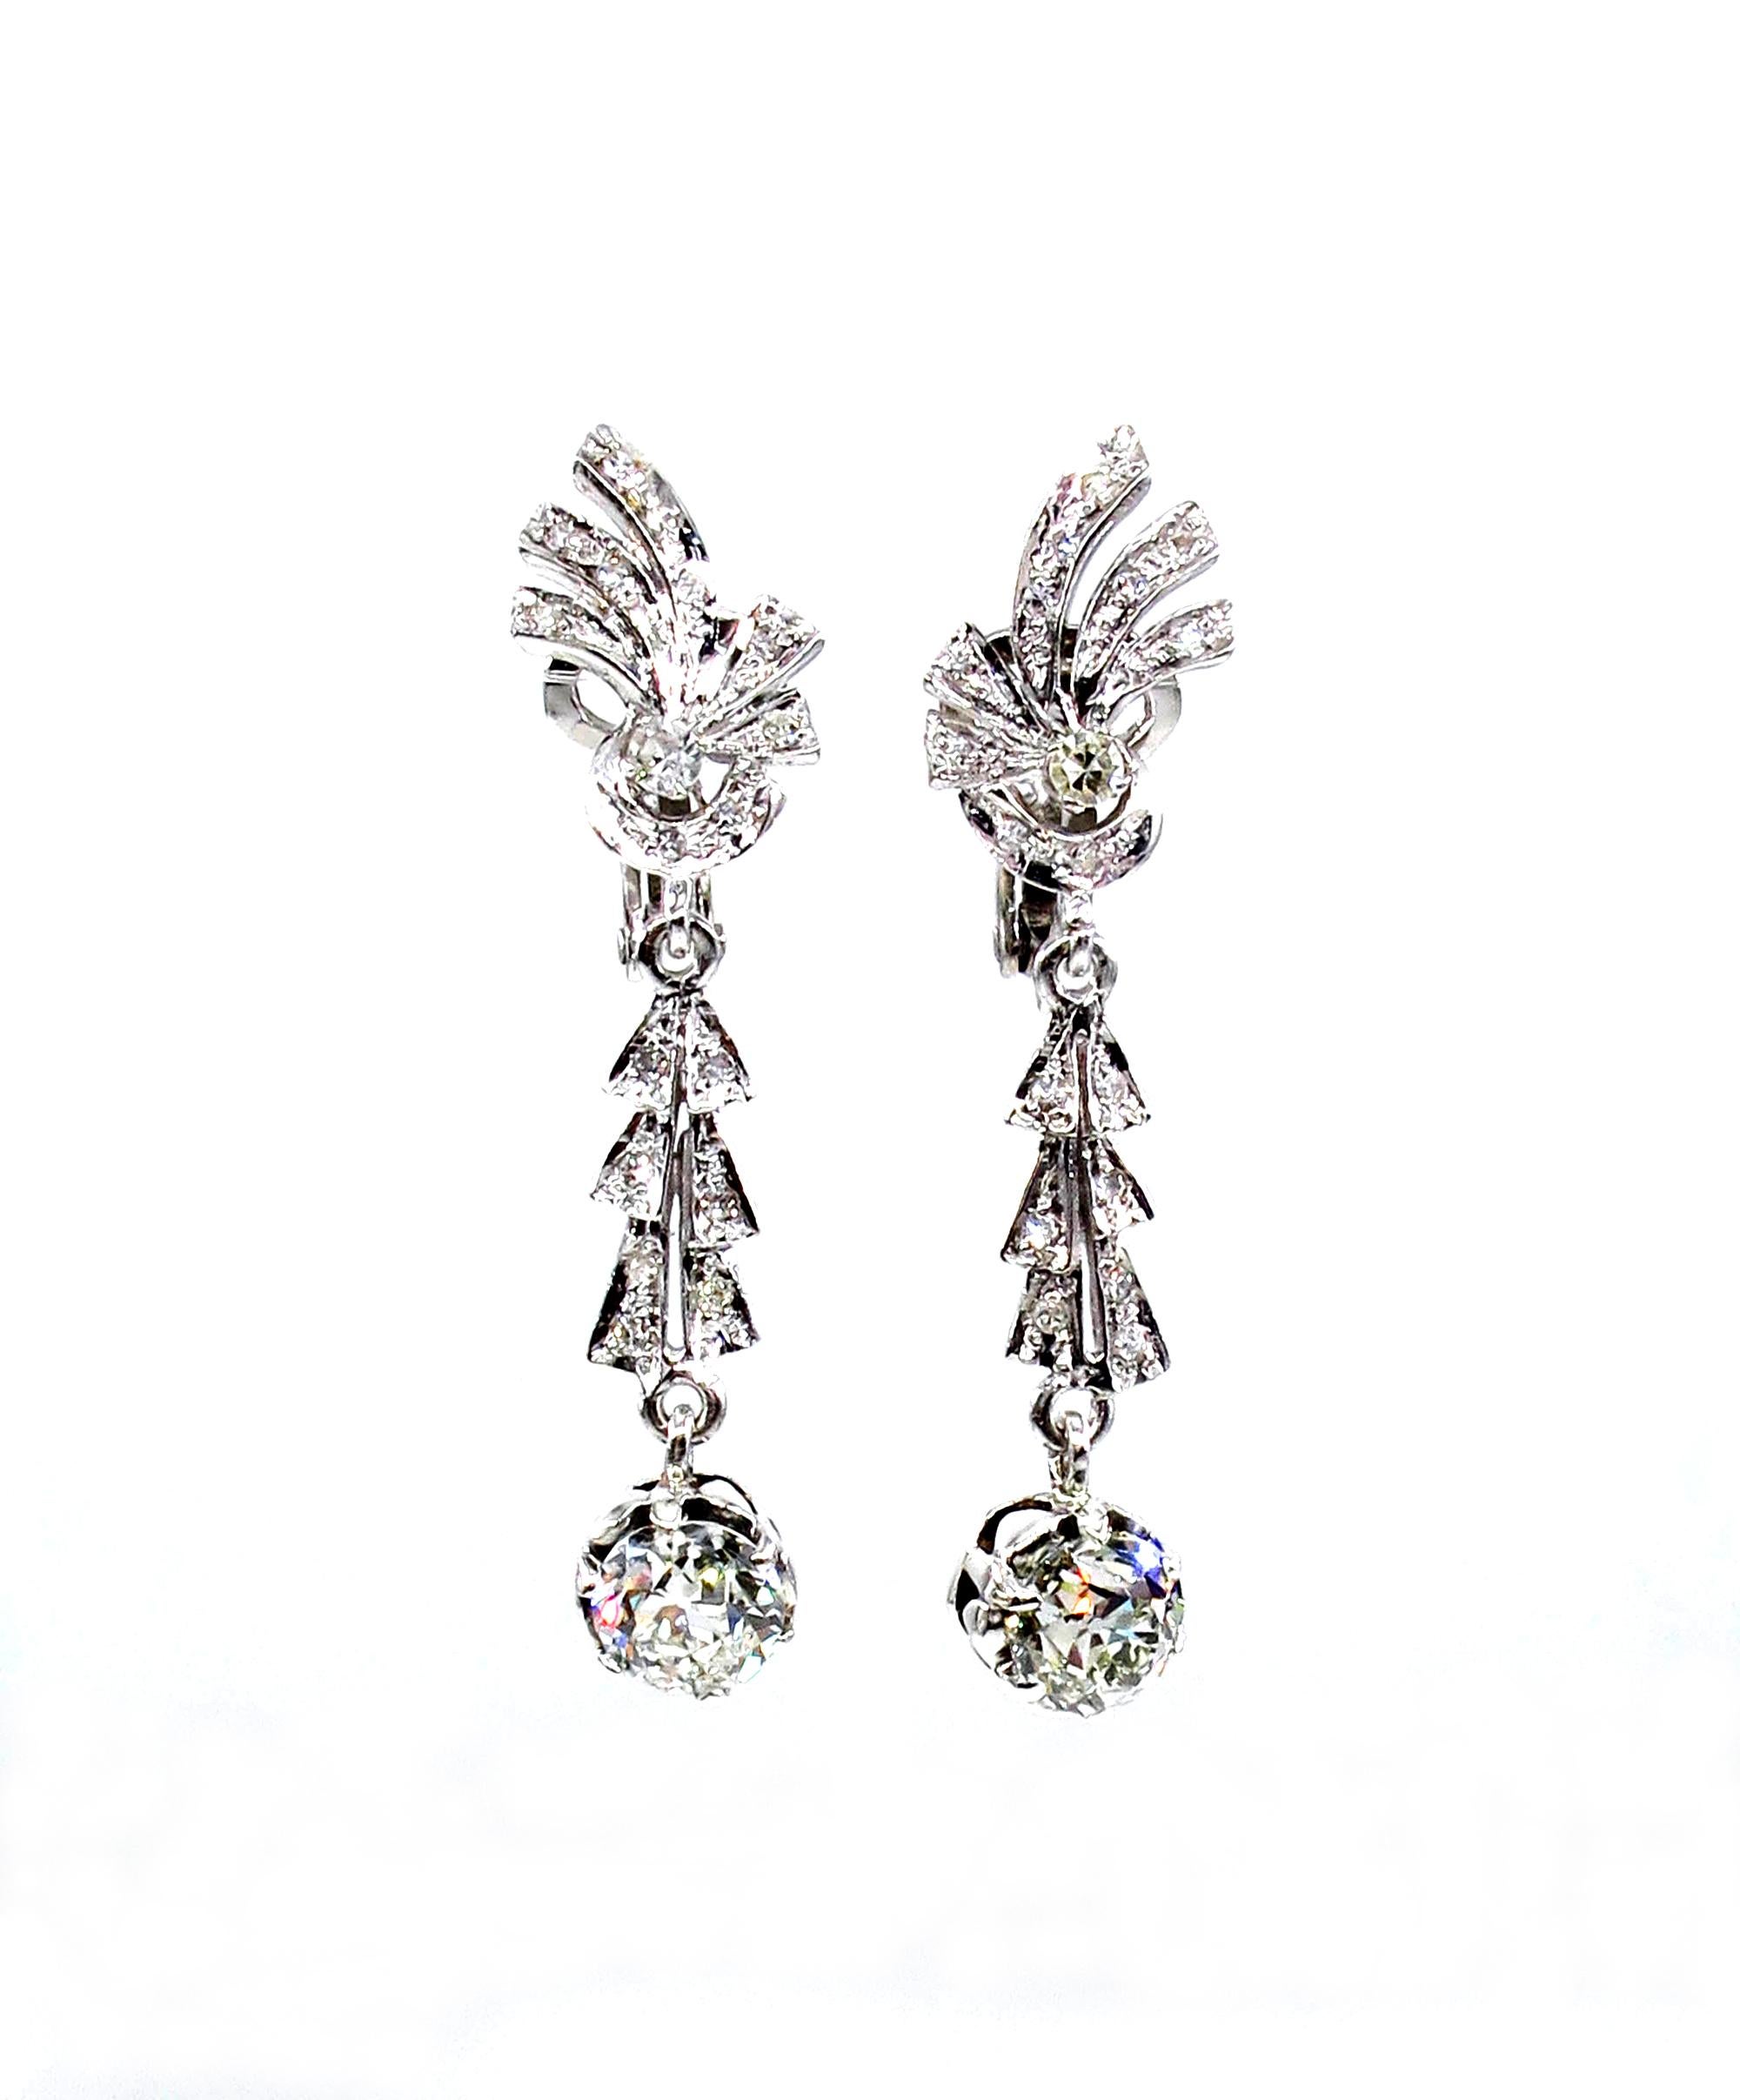 A sleek and sexy pair of ART DECO Diamond Drop Earrings with bright and sparkling Old European diamonds in Buttercup settings suspend from glittering fanciful diamond flares in these almost 1 3/4 inches long and extraordinarily lovely and lustrous